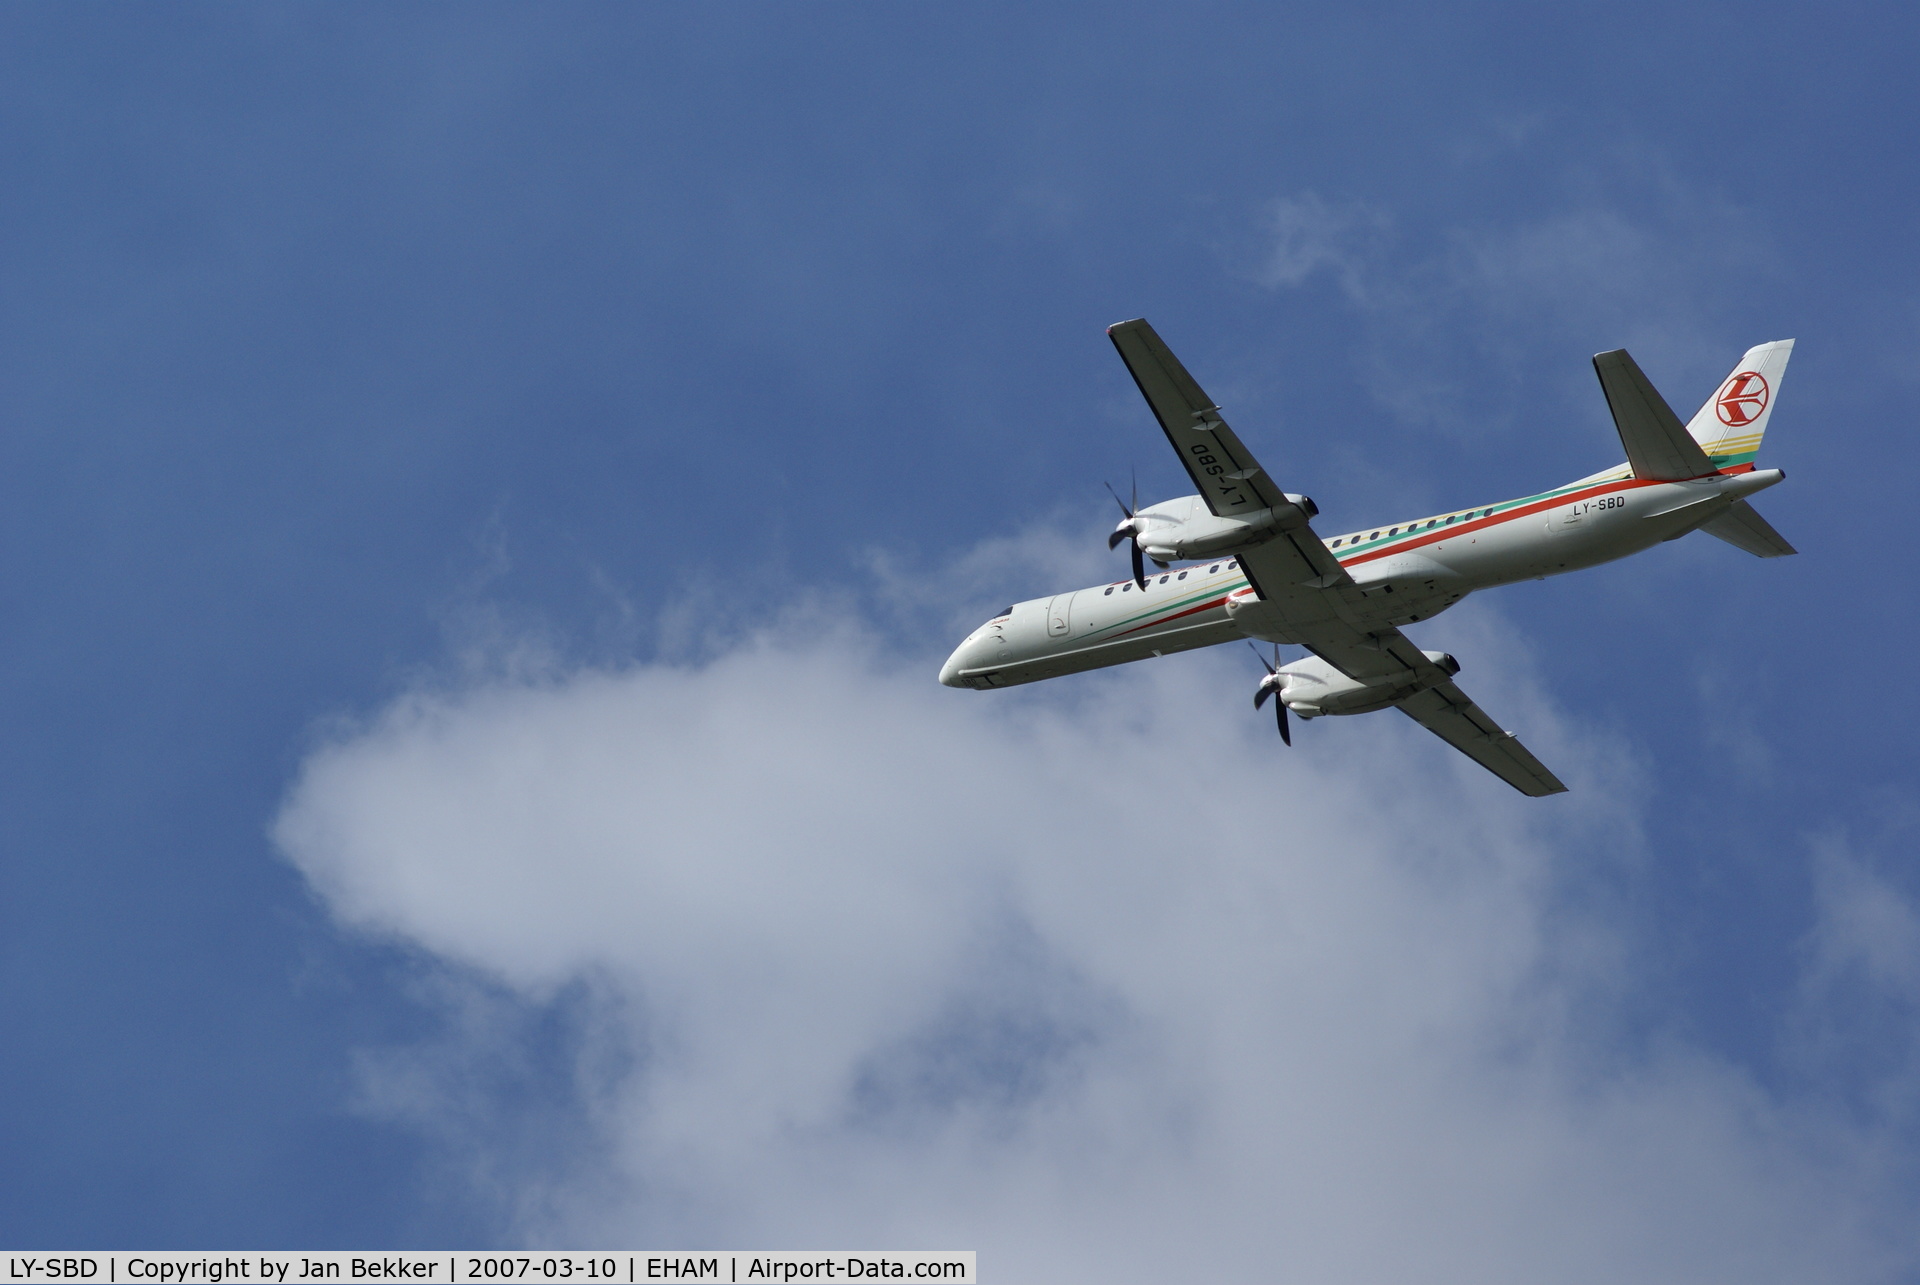 LY-SBD, 1995 Saab 2000 C/N 2000-023, Taking off from Schiphol